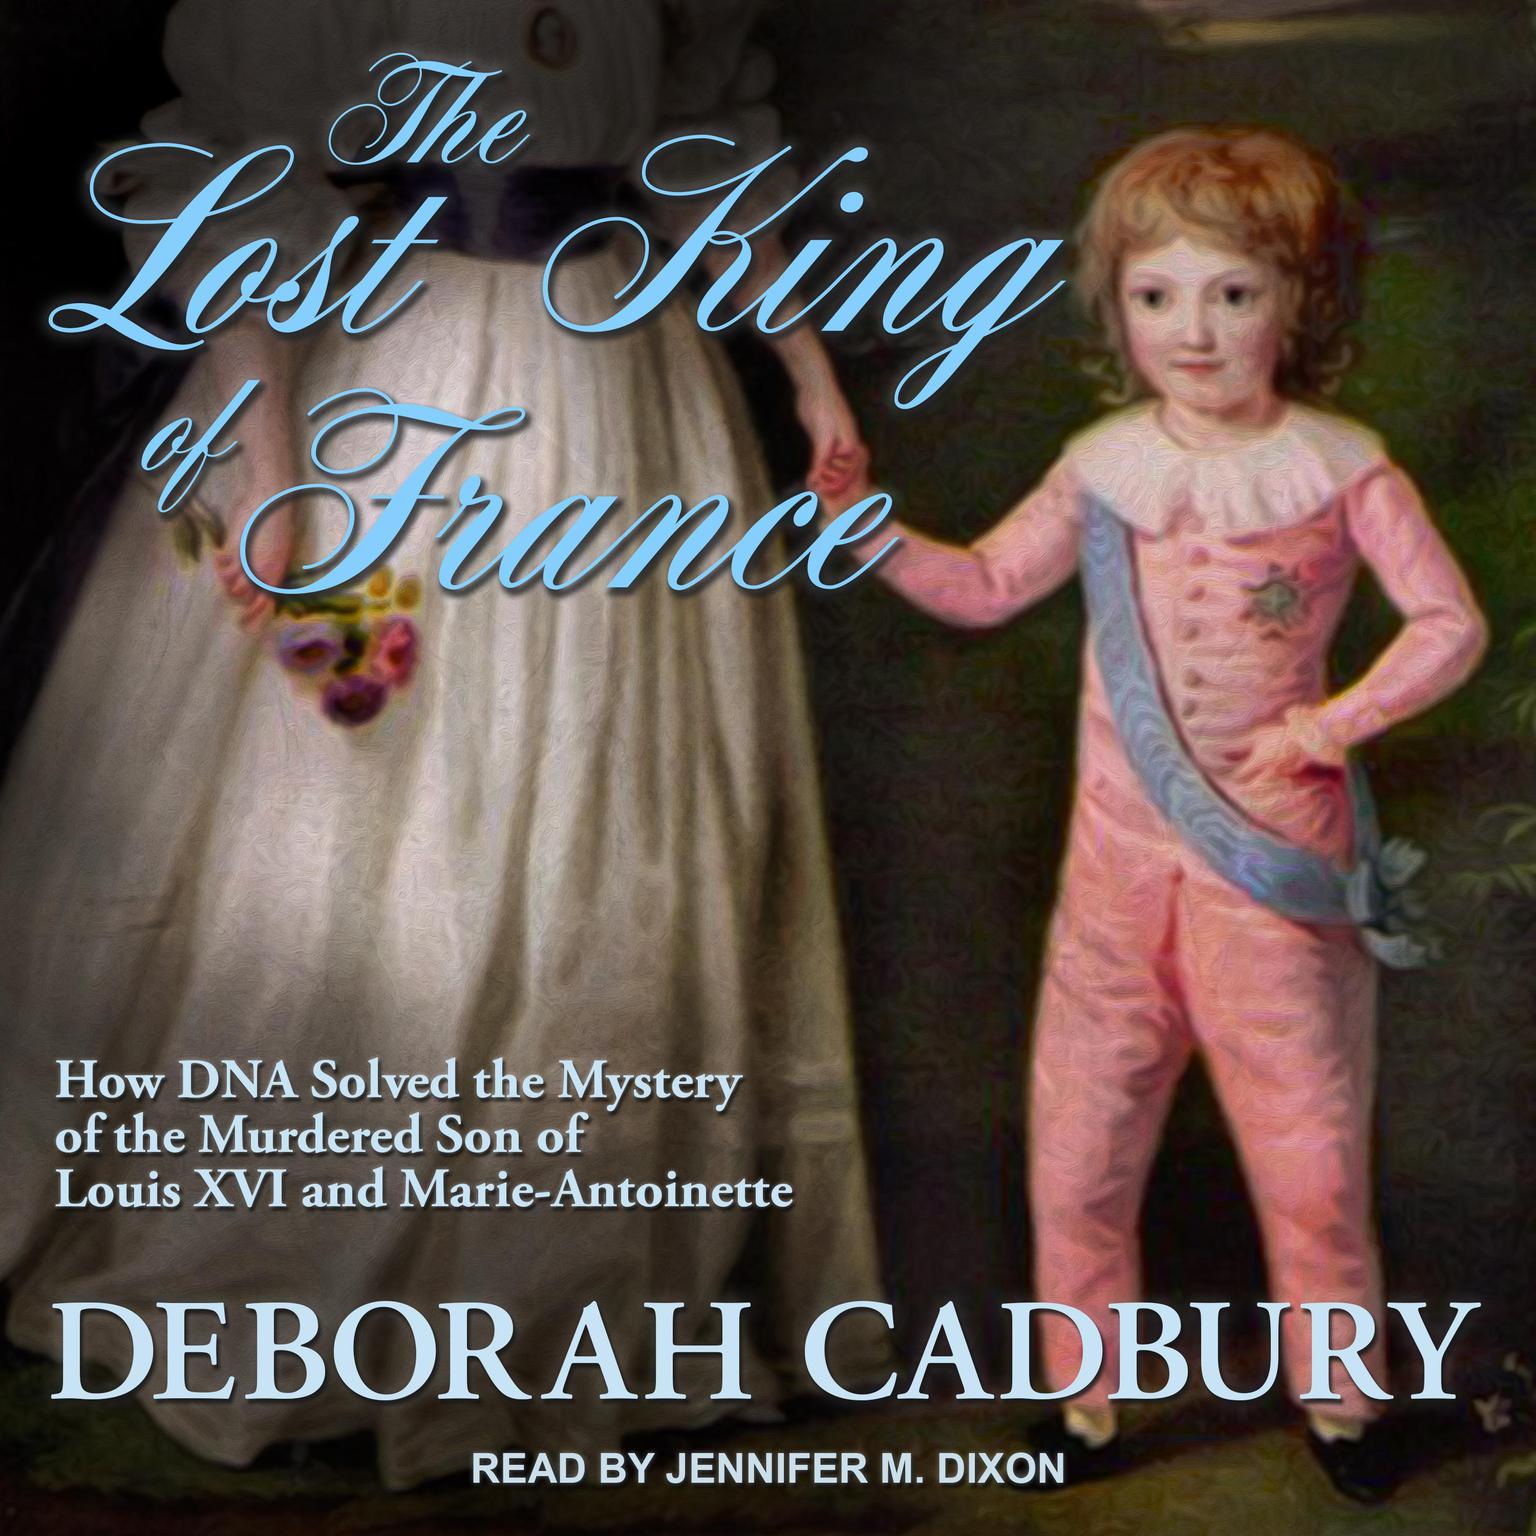 The Lost King of France: How DNA Solved the Mystery of the Murdered Son of Louis XVI and Marie Antoinette Audiobook, by Deborah Cadbury